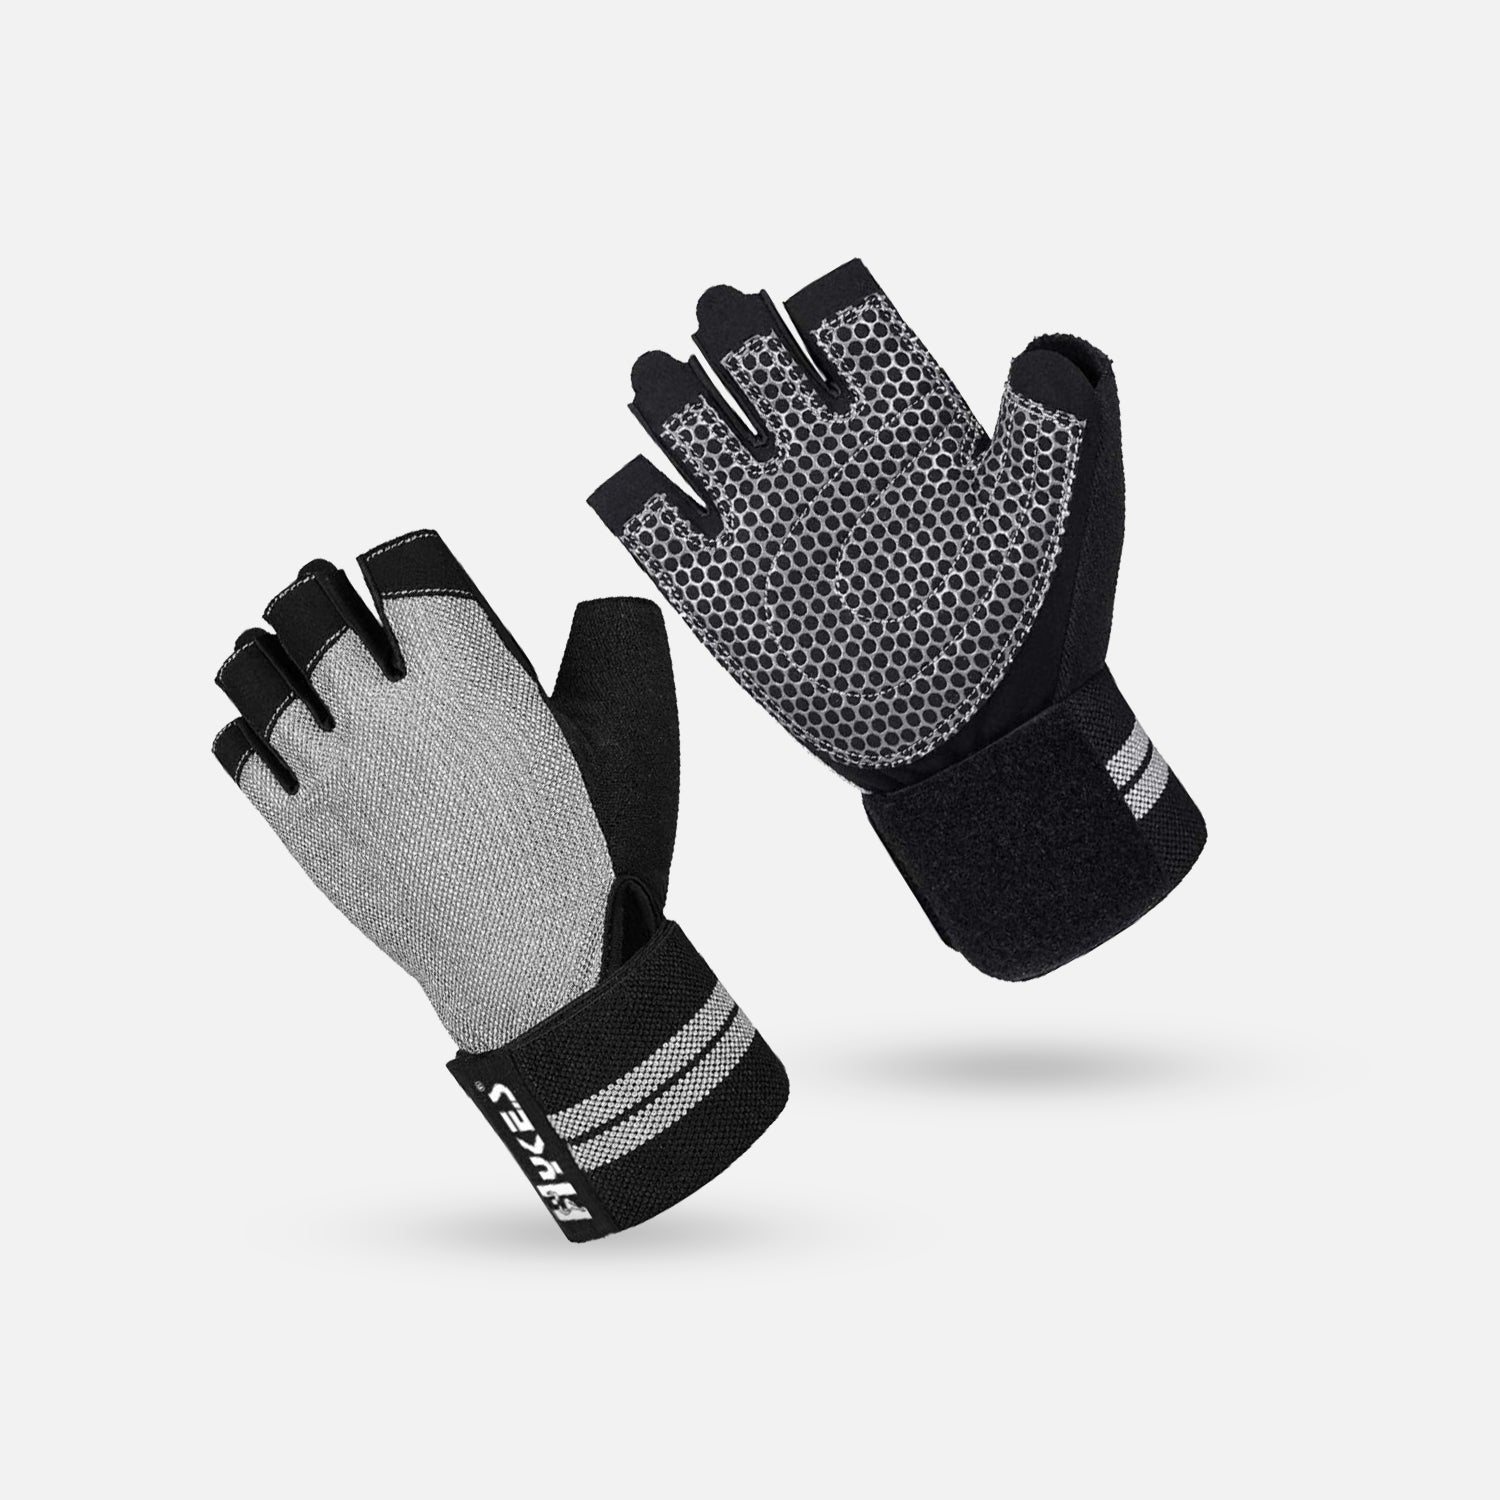 Buy Gym Gloves, Weight Lifting Gloves